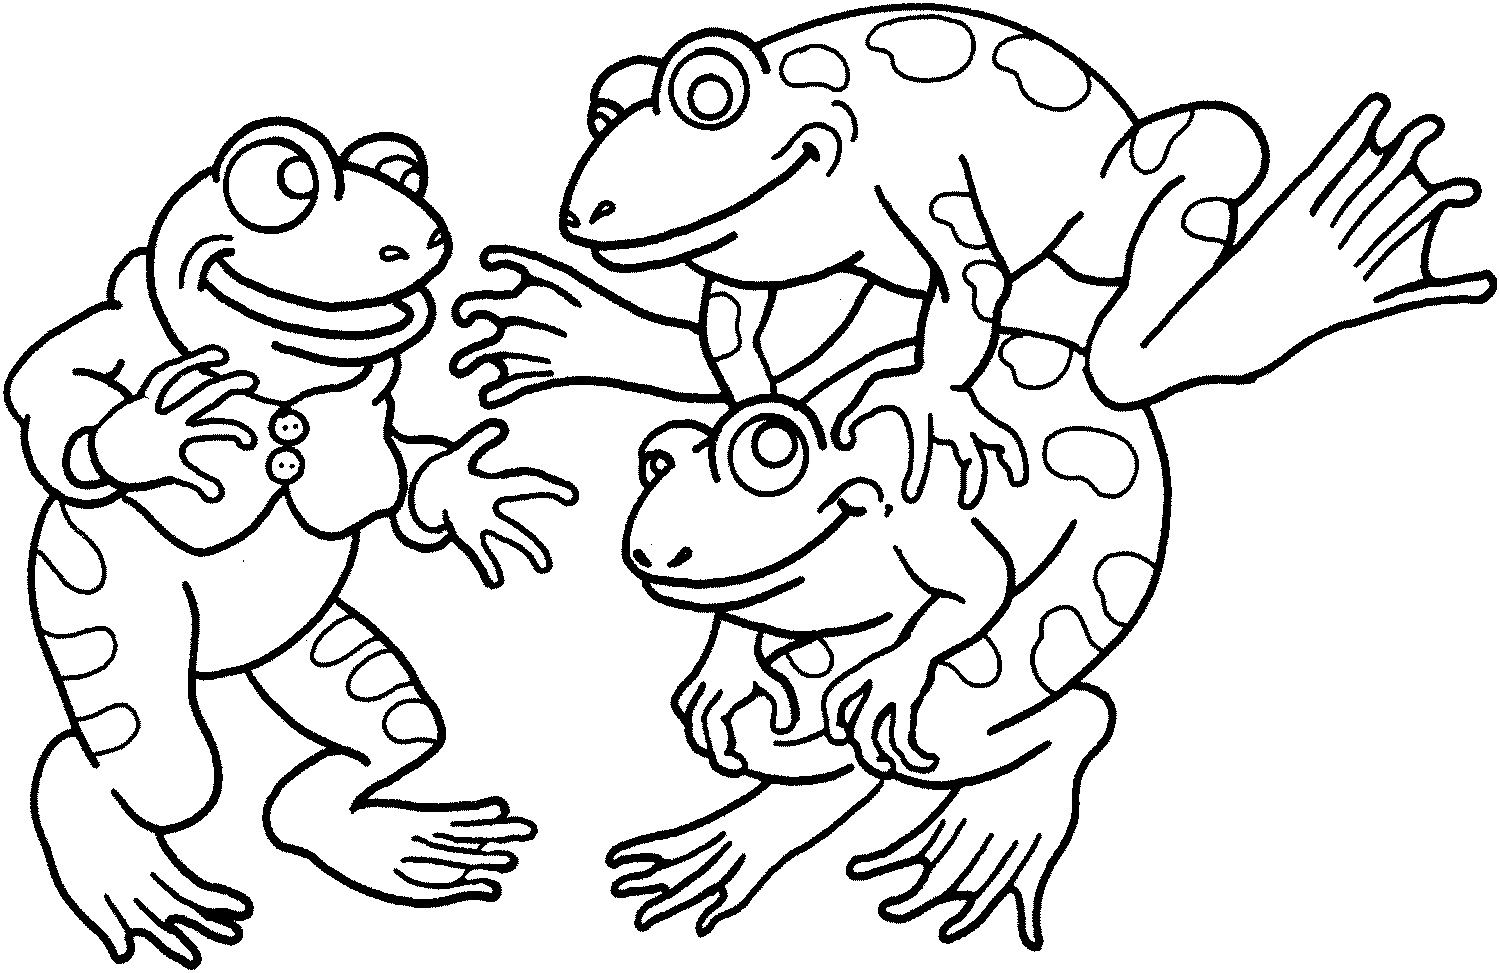 Free printable frog coloring pages for kids